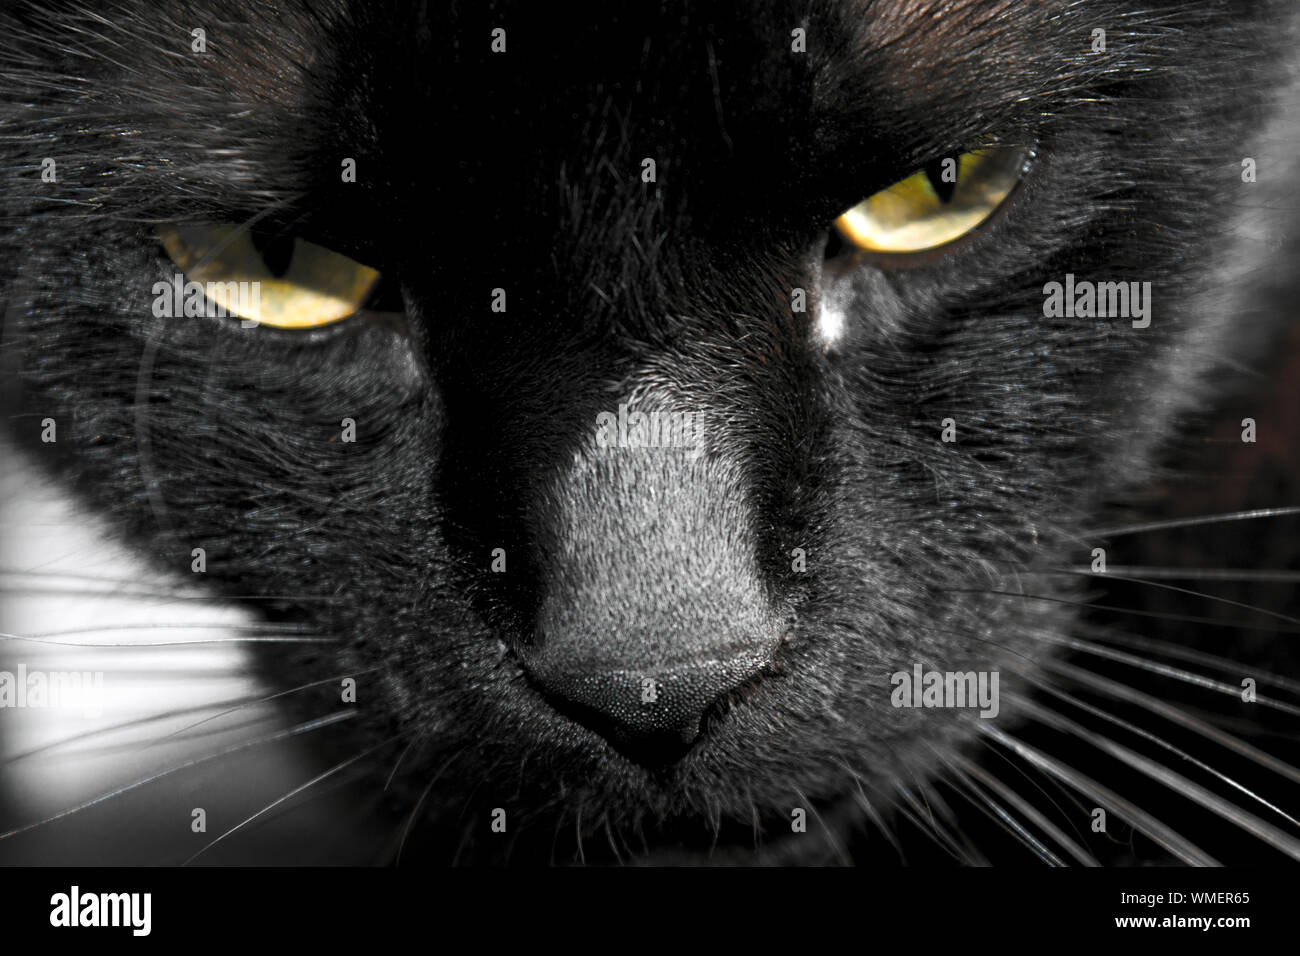 Puss, the most interactive black cat in the world, frowning. Stock Photo